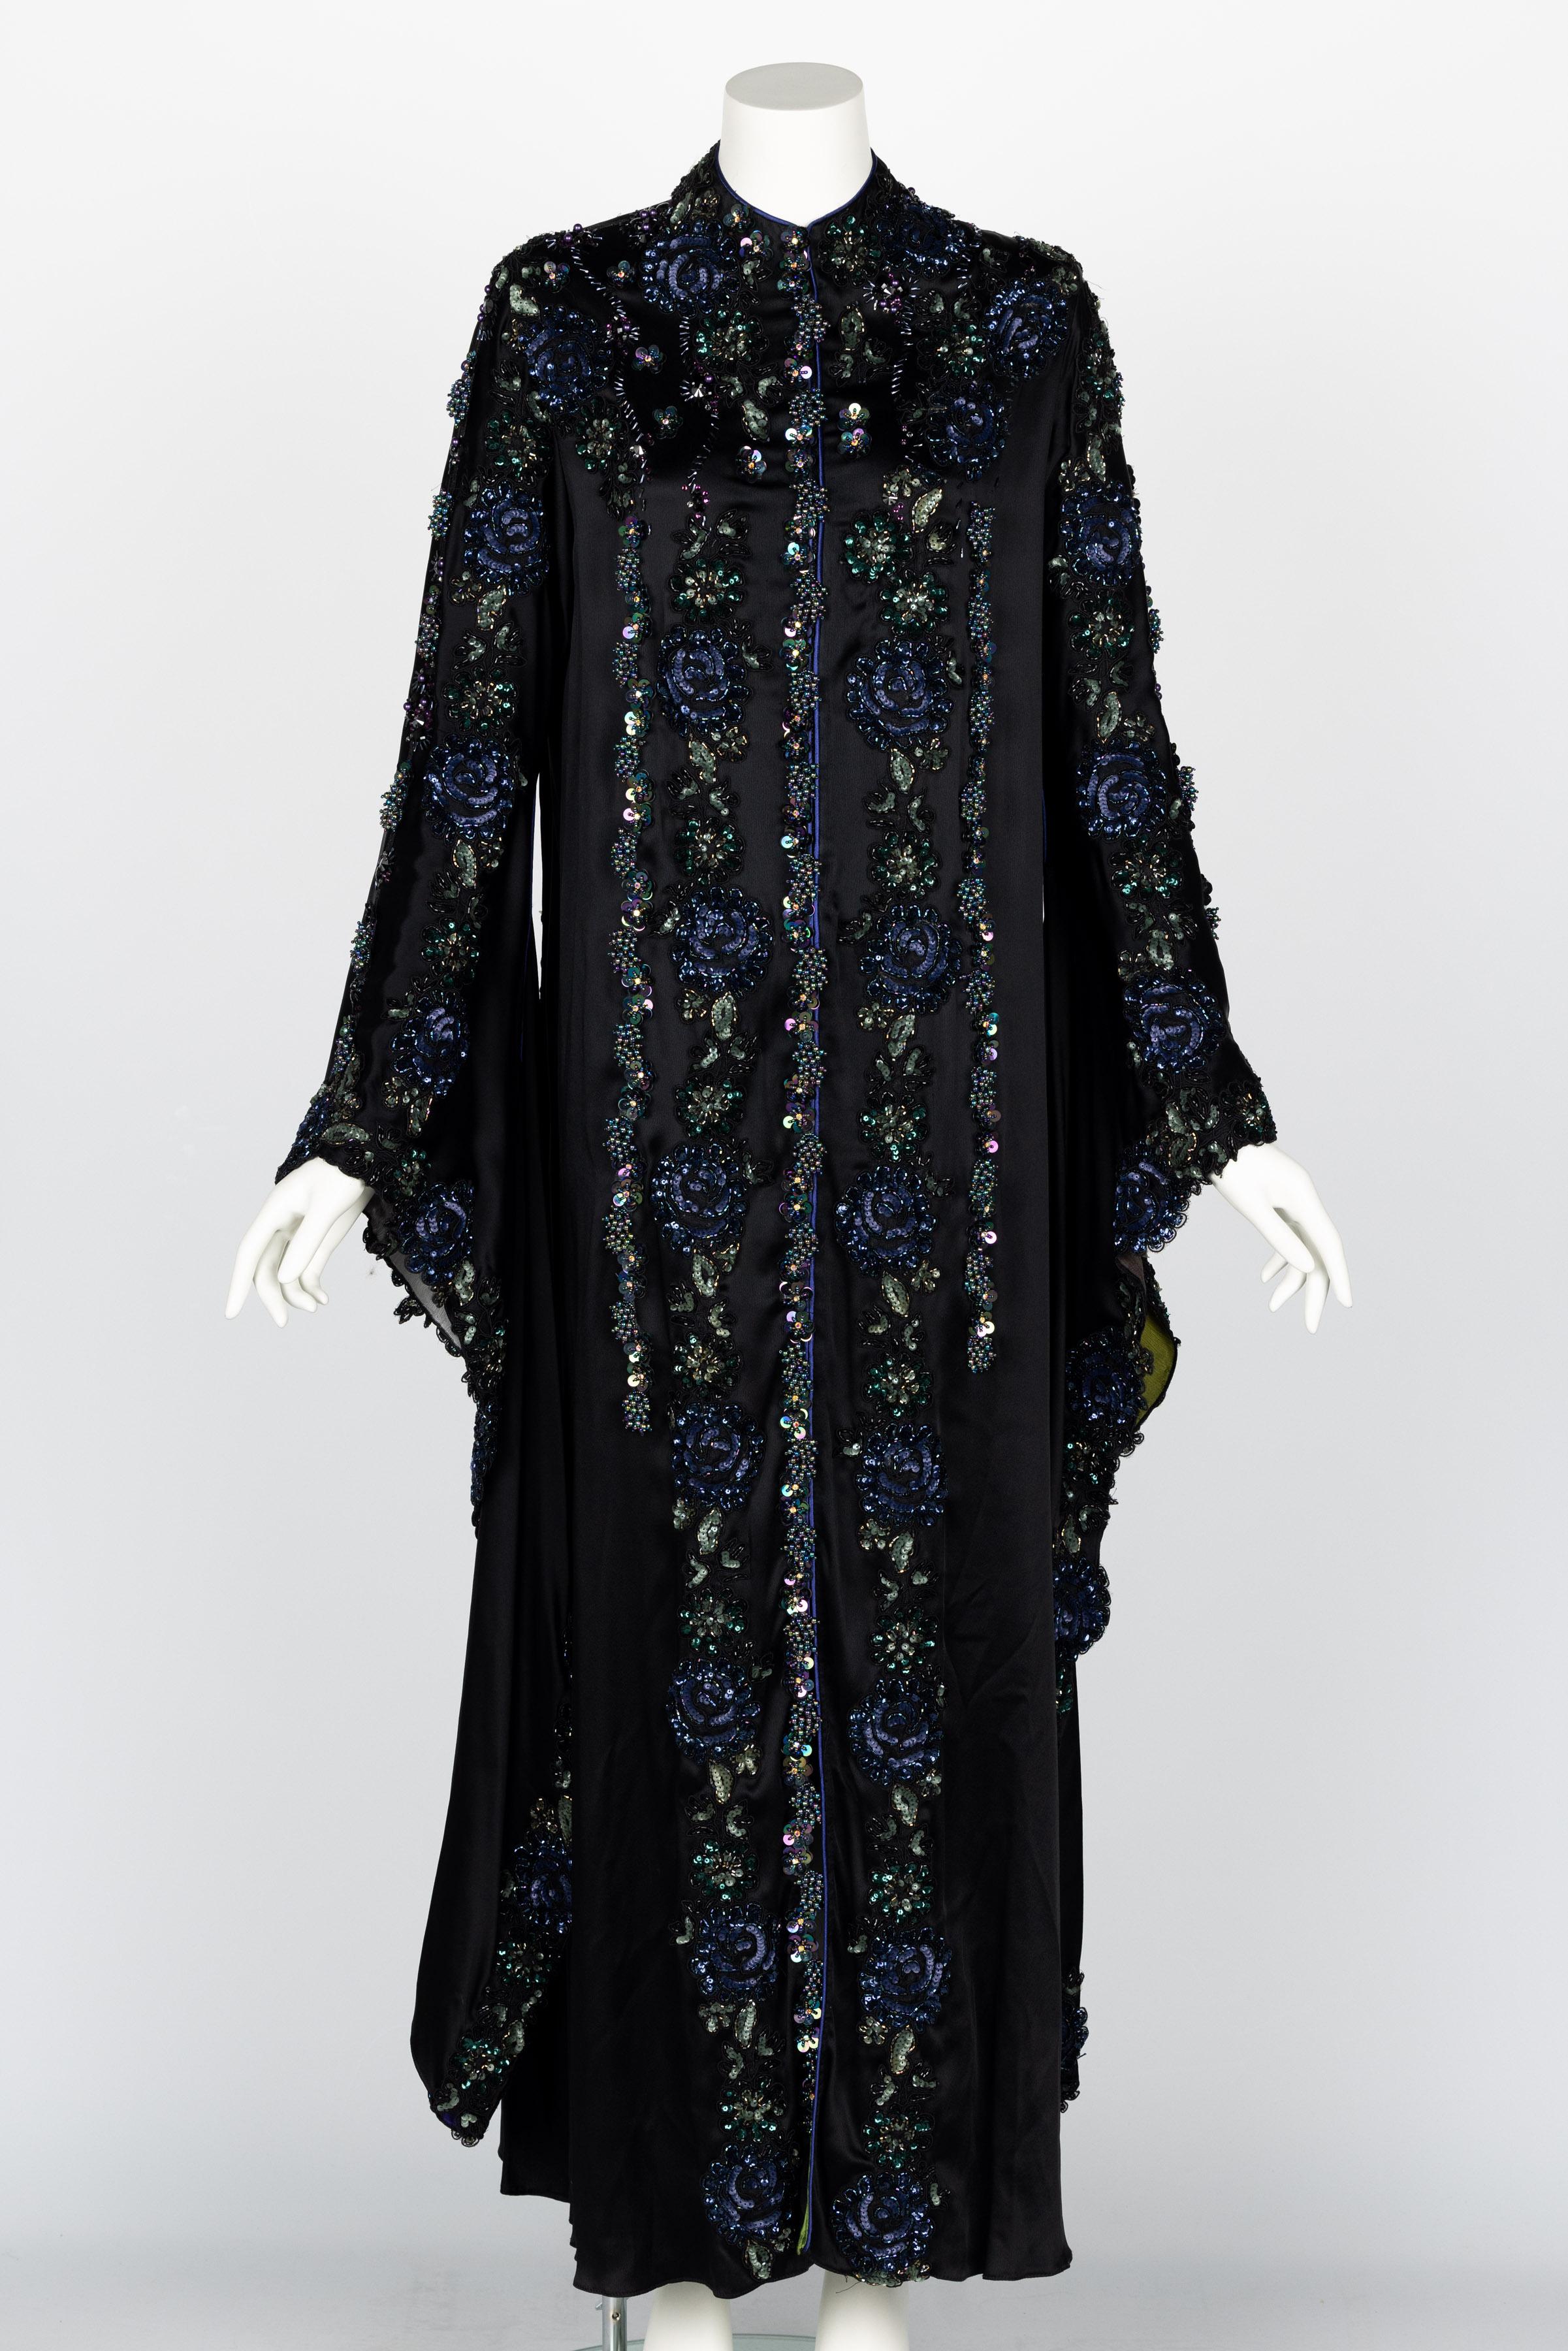 The caftan is a celebrated garment that has special historical and cultural significance in many countries, including Morocco. It may be worn every day or on special occasions, and has served as the source of inspiration for countless couture